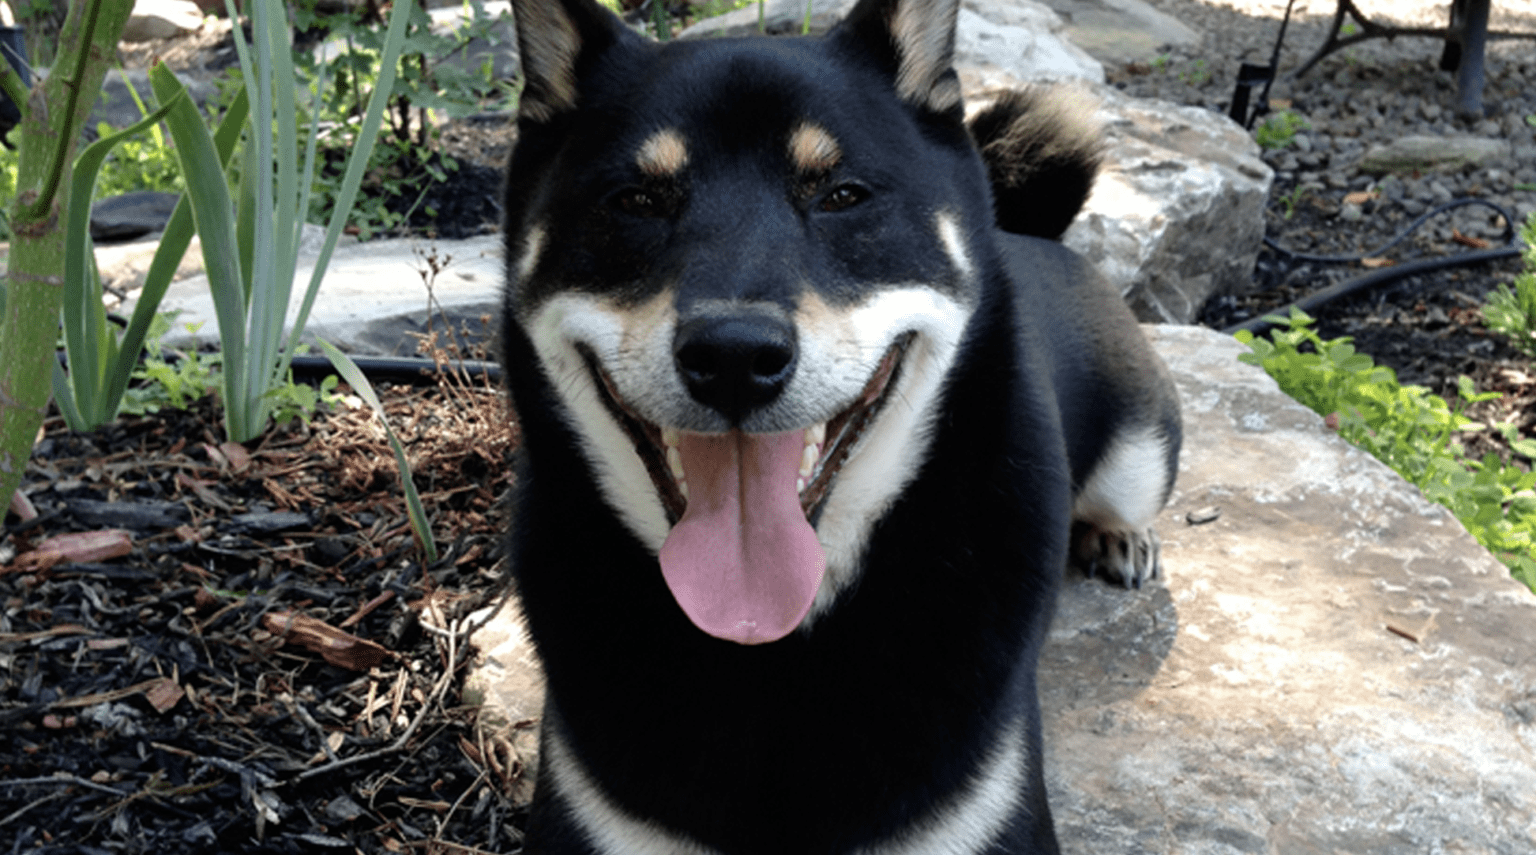 photo of BUKI the shiba inu that inspired the logo and name of the technology